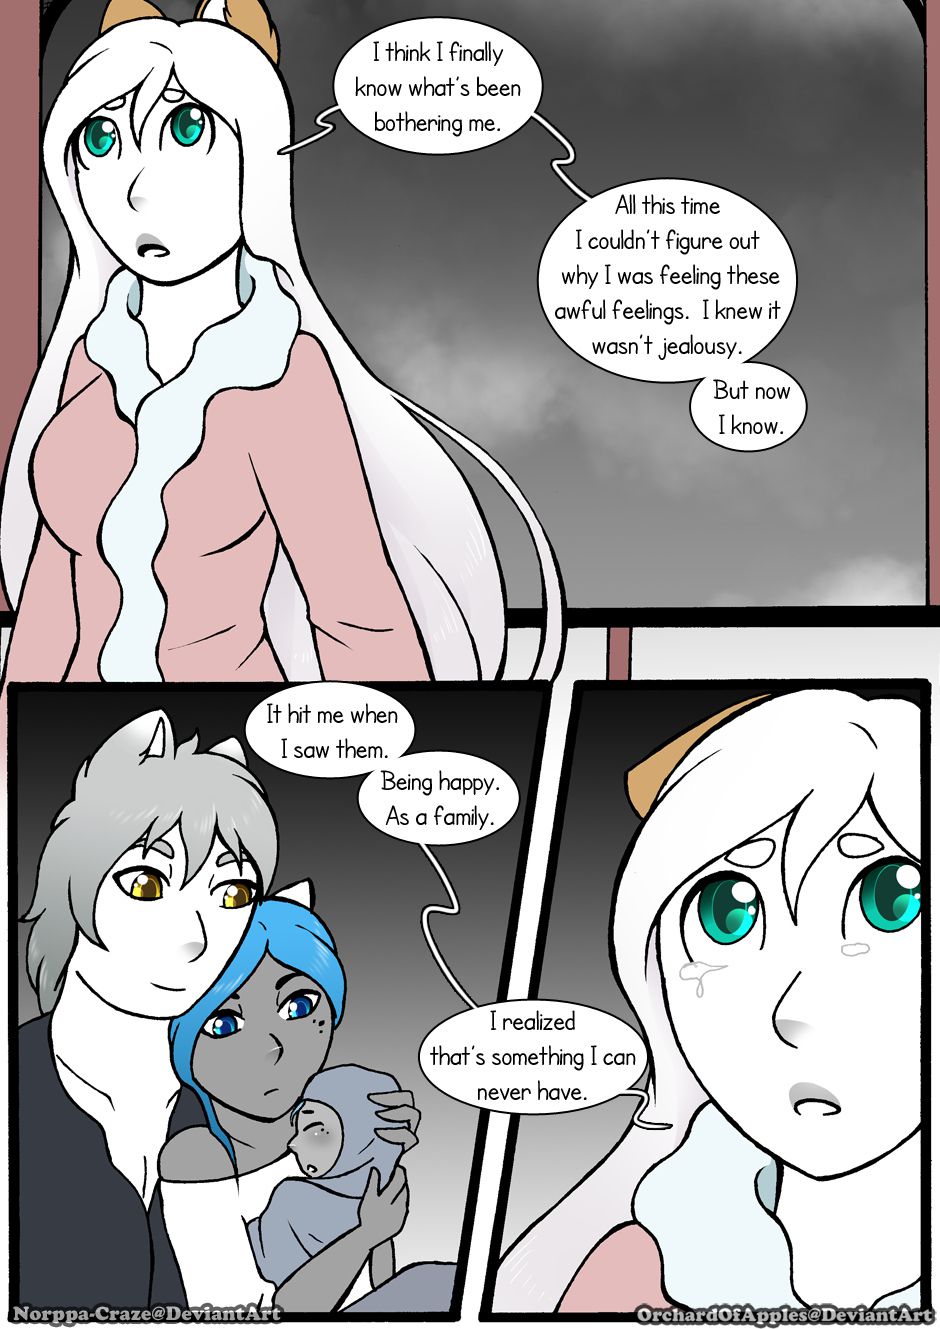 [Jeny-jen94] Between Kings and Queens [Ongoing] 340